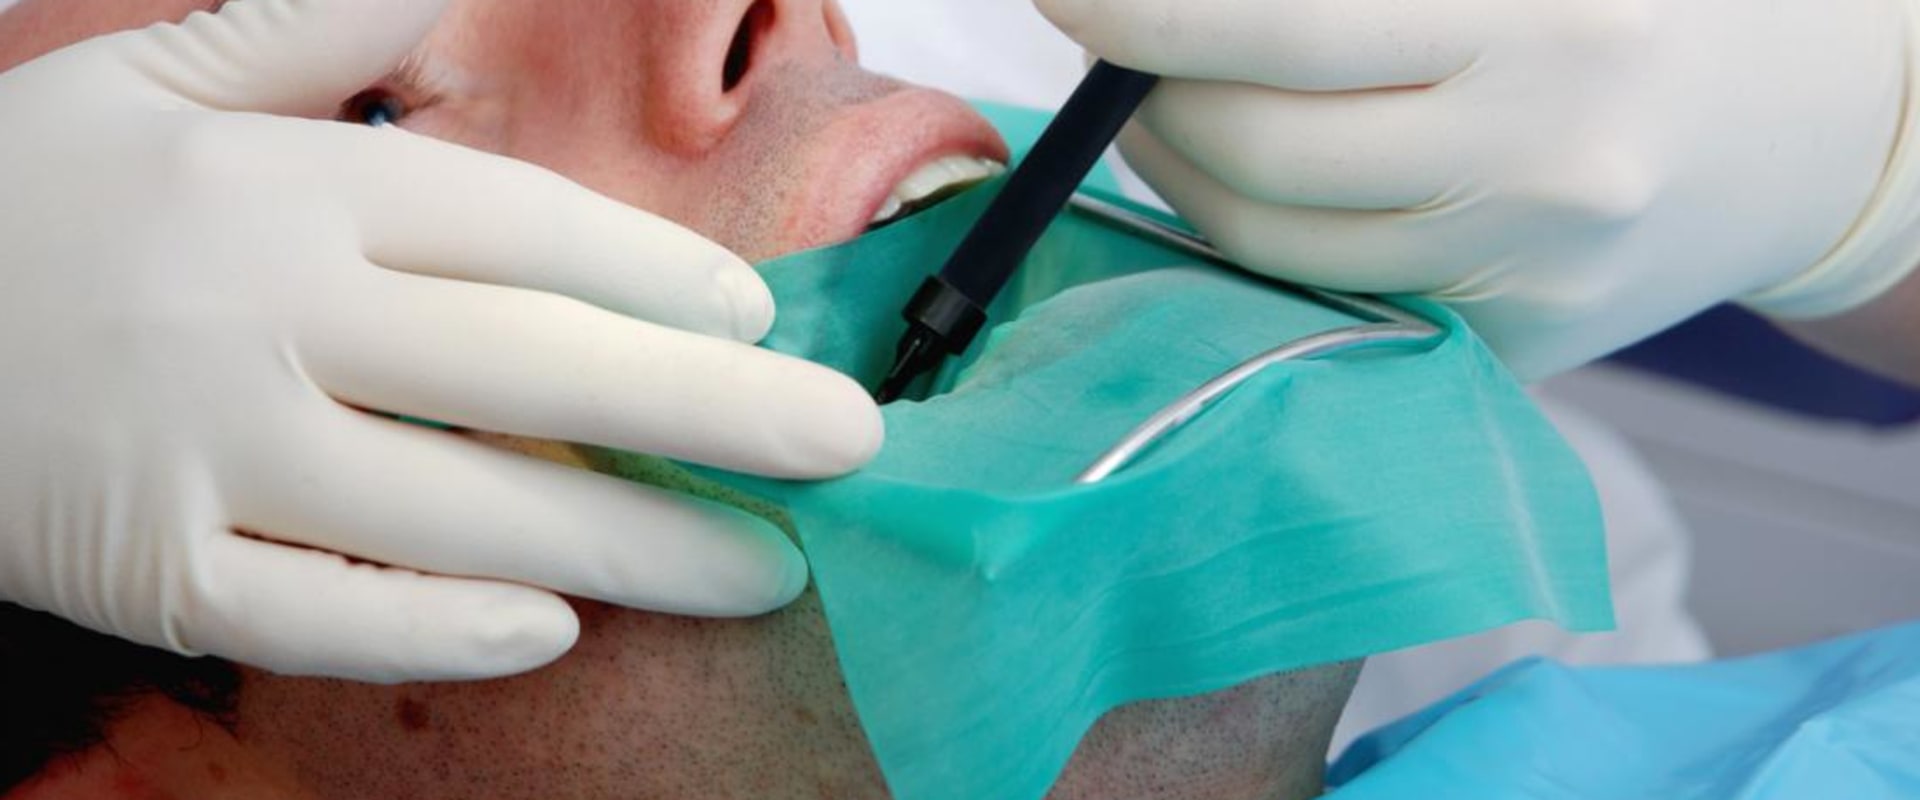 What are the steps to becoming an endodontist?